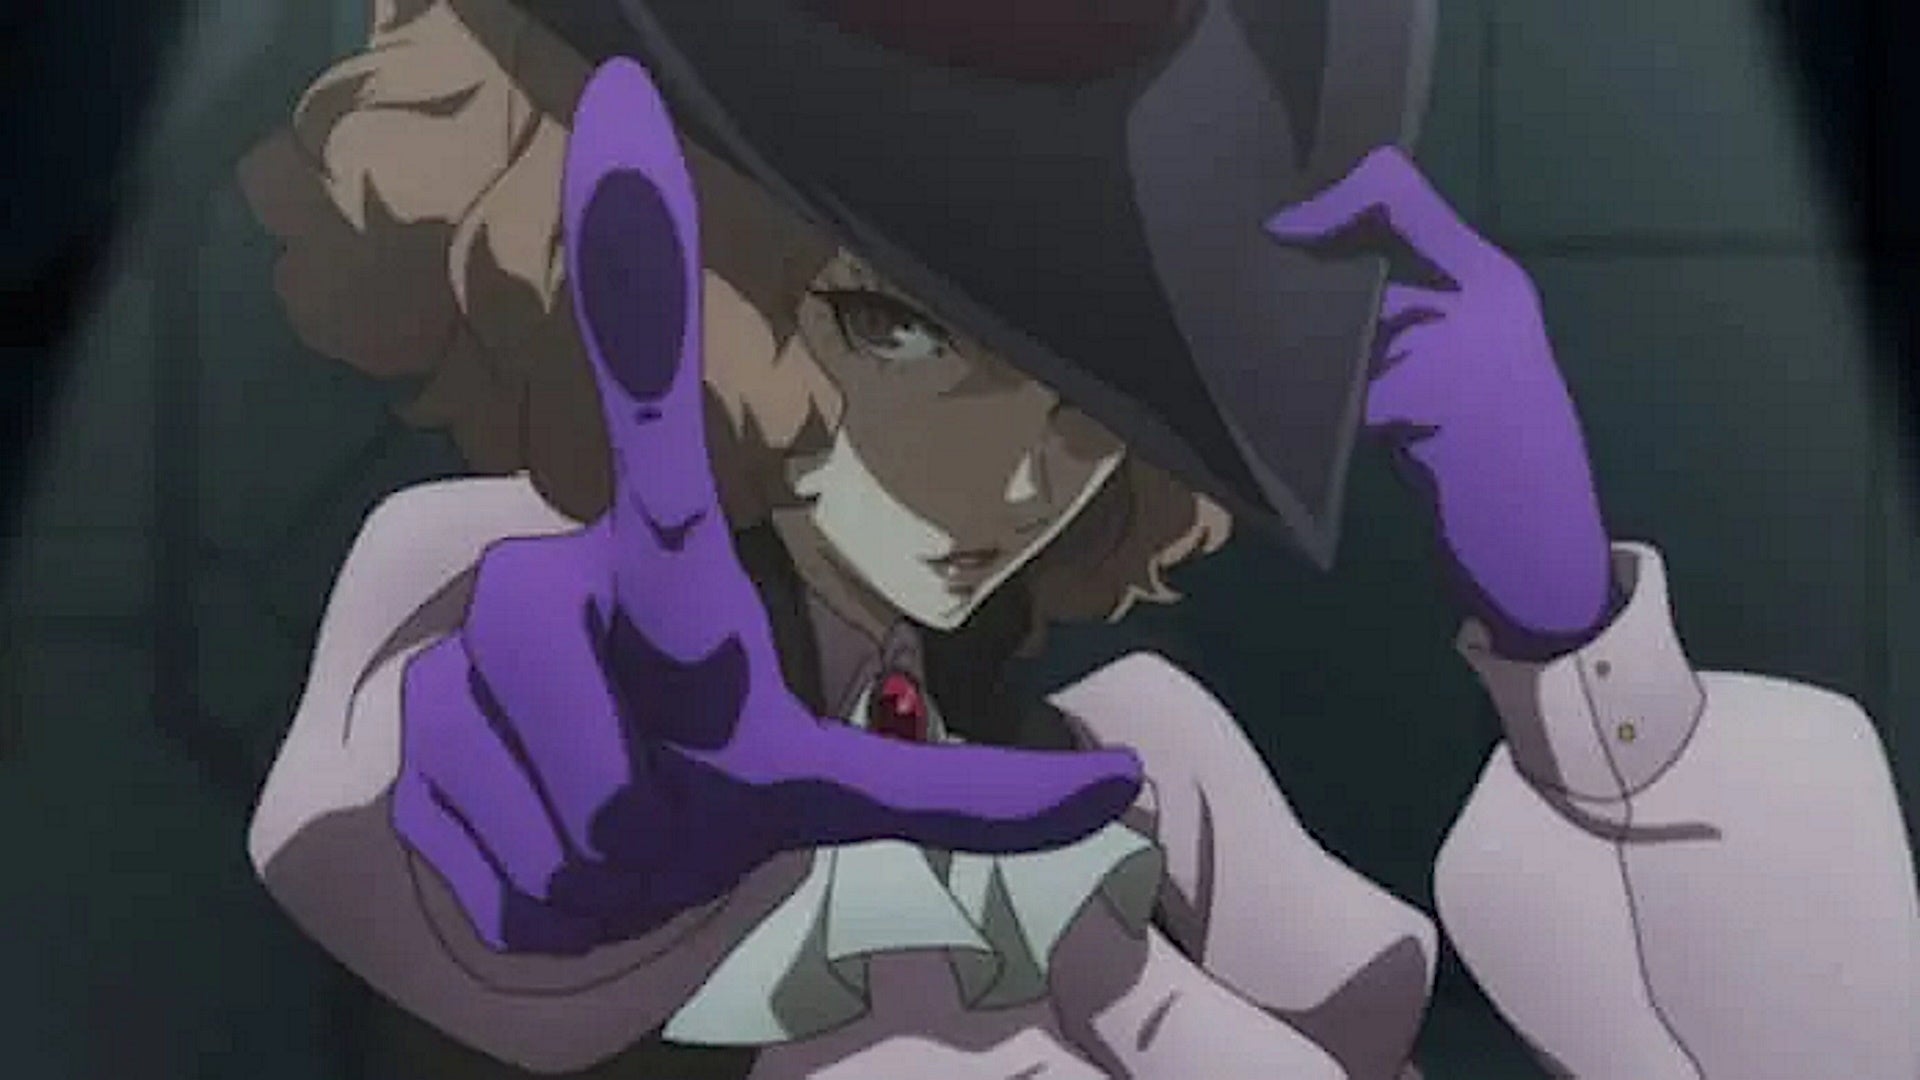 Persona 5 Royal Haru Confidant: An anime young woman in a black hat and frilly pink blouse points a lavender-gloved finger at the camera